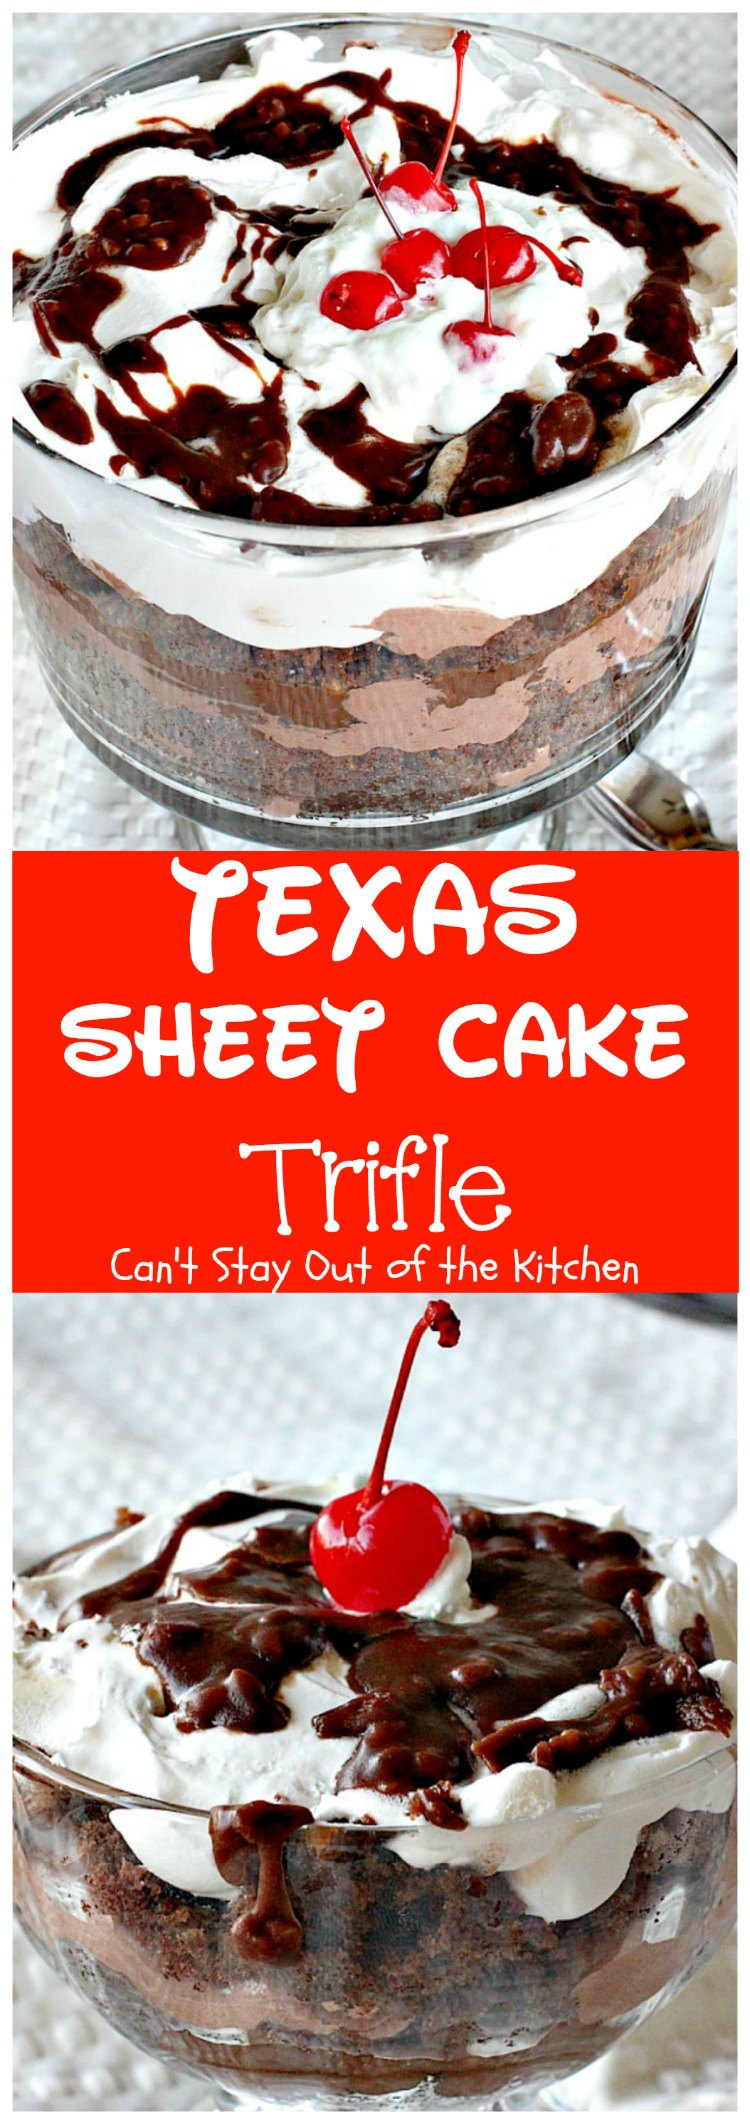 Texas Sheet Cake Trifle | Can't Stay Out of the Kitchen